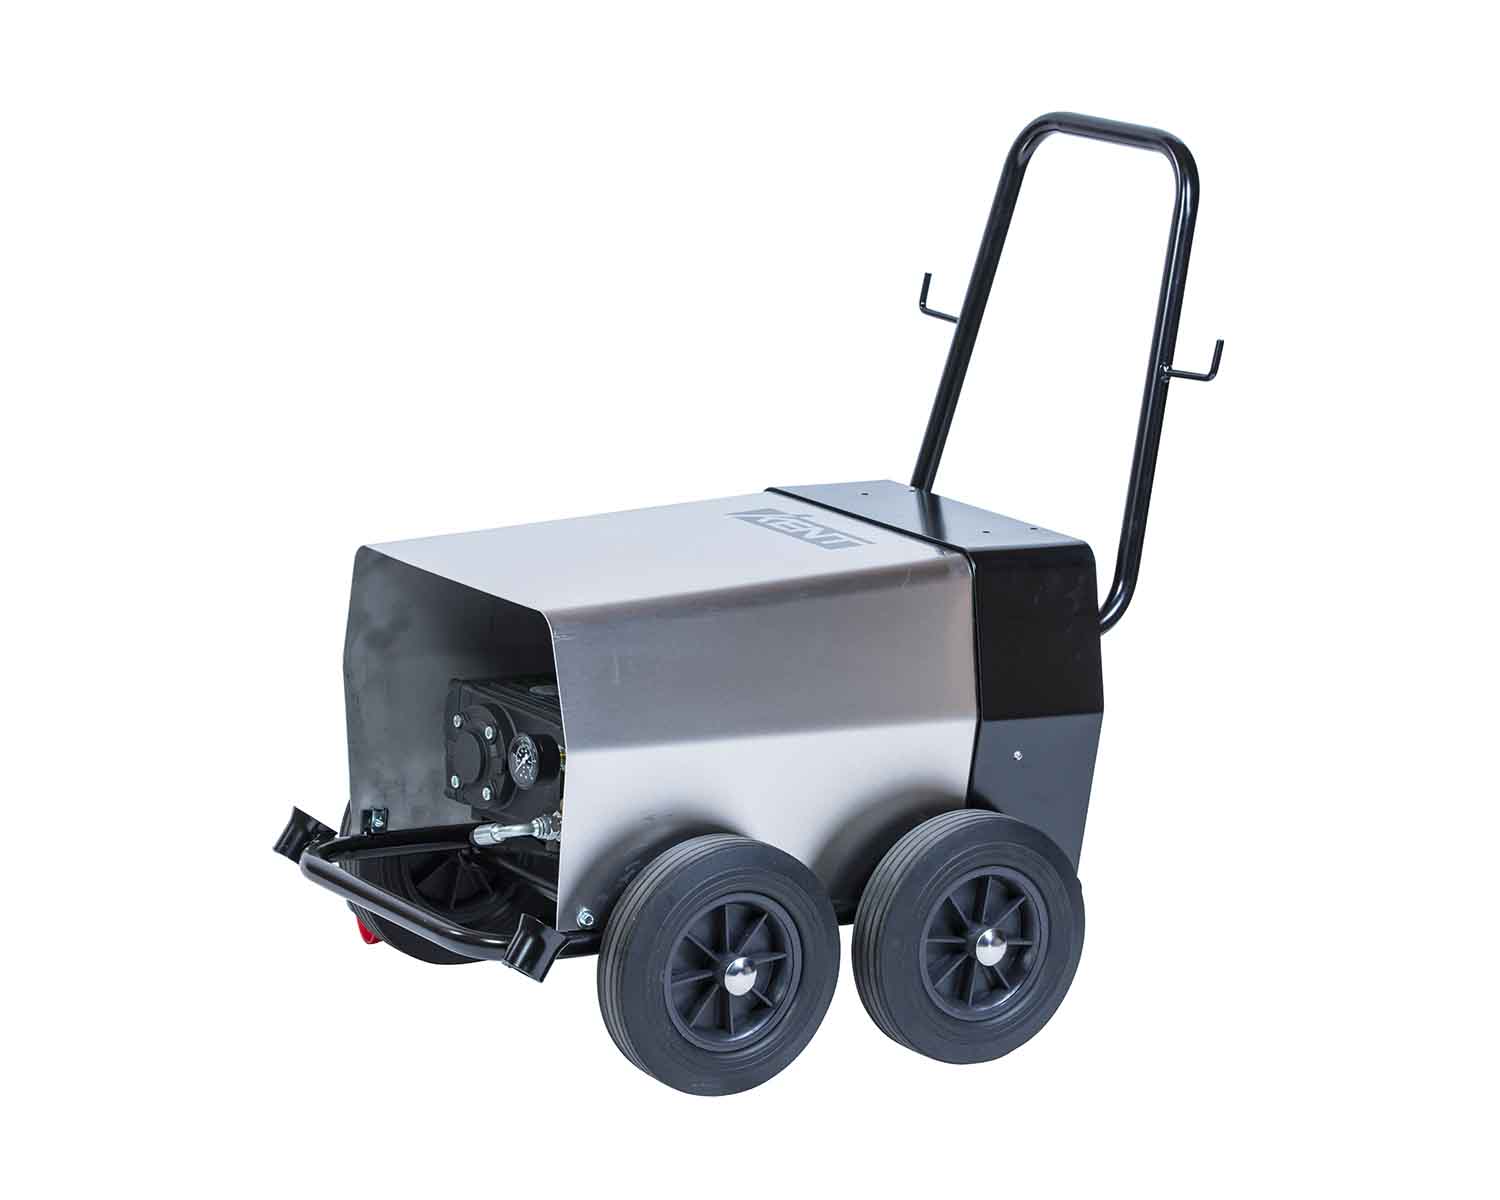 Large Professional cold water pressure washer on 4 wheels